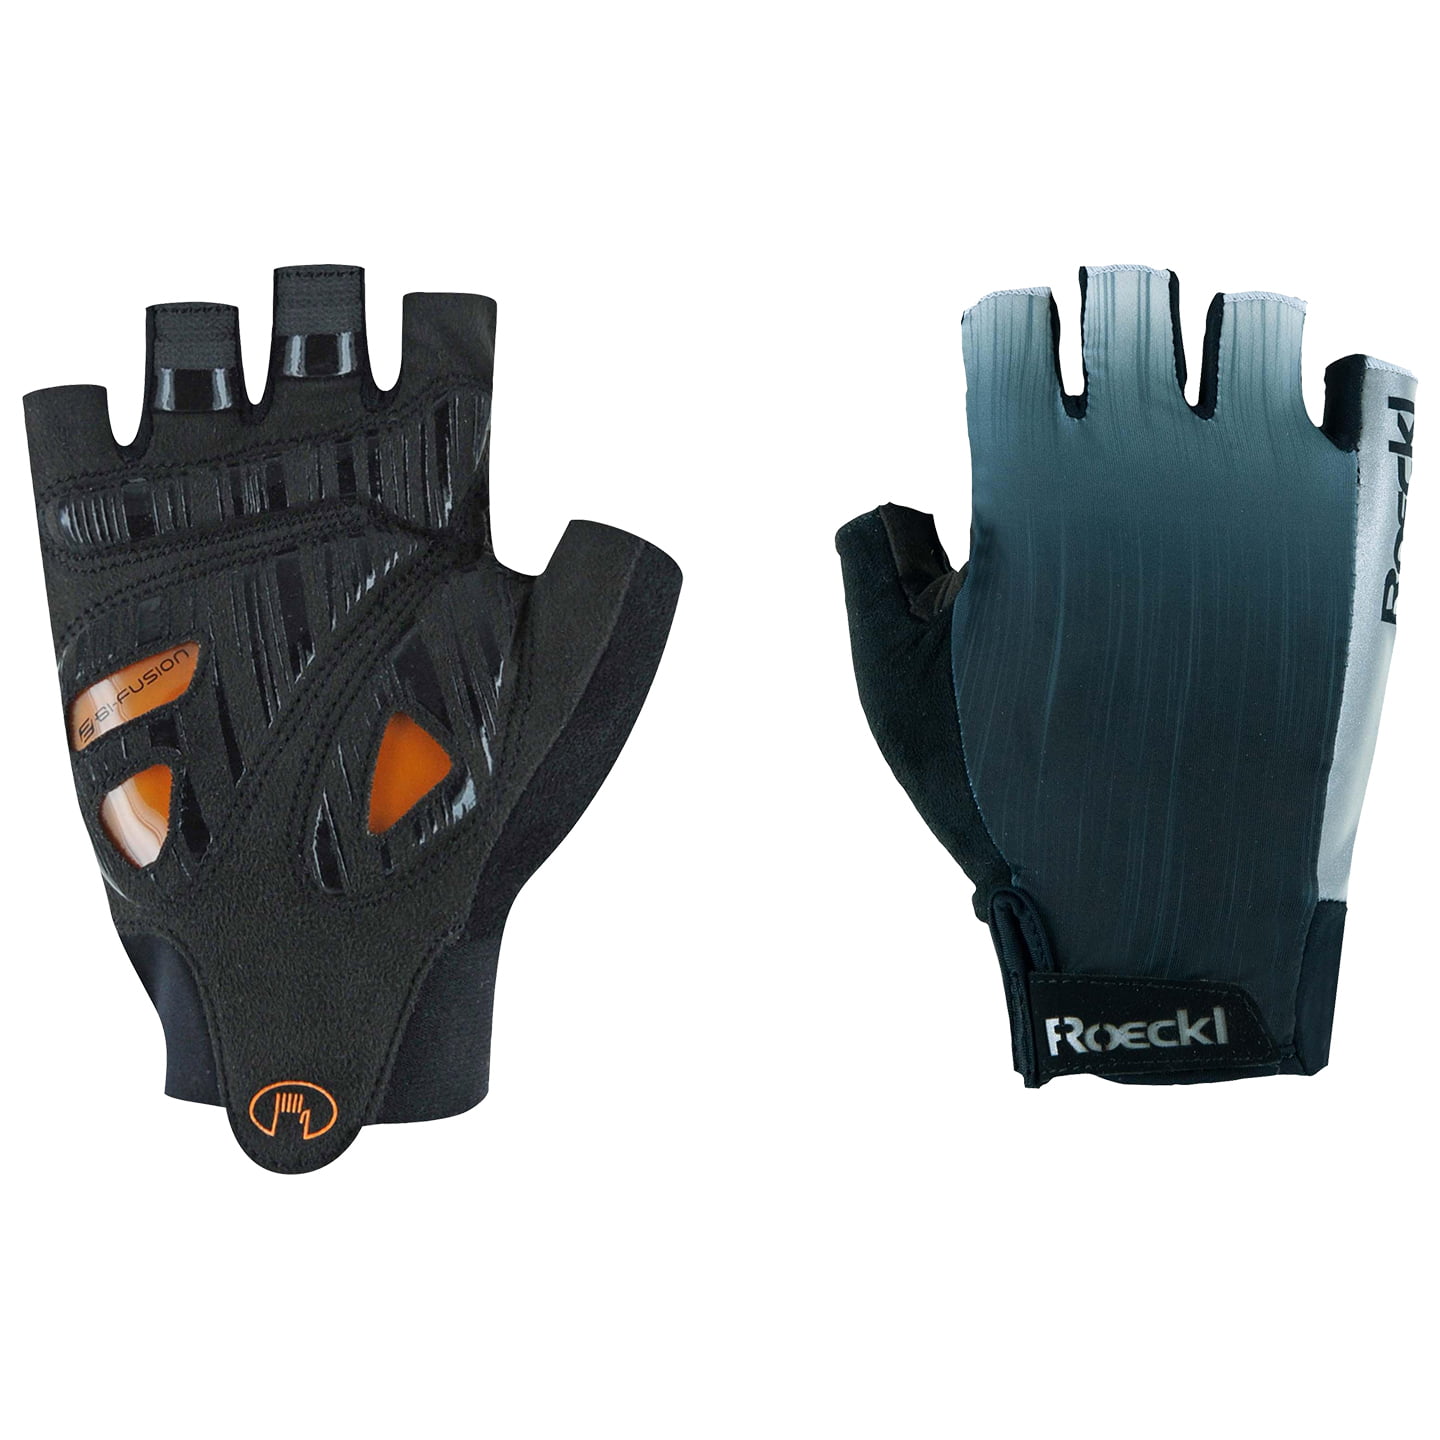 ROECKL Illasi MTB Gloves Cycling Gloves, for men, size 7, Cycling gloves, Cycling clothes